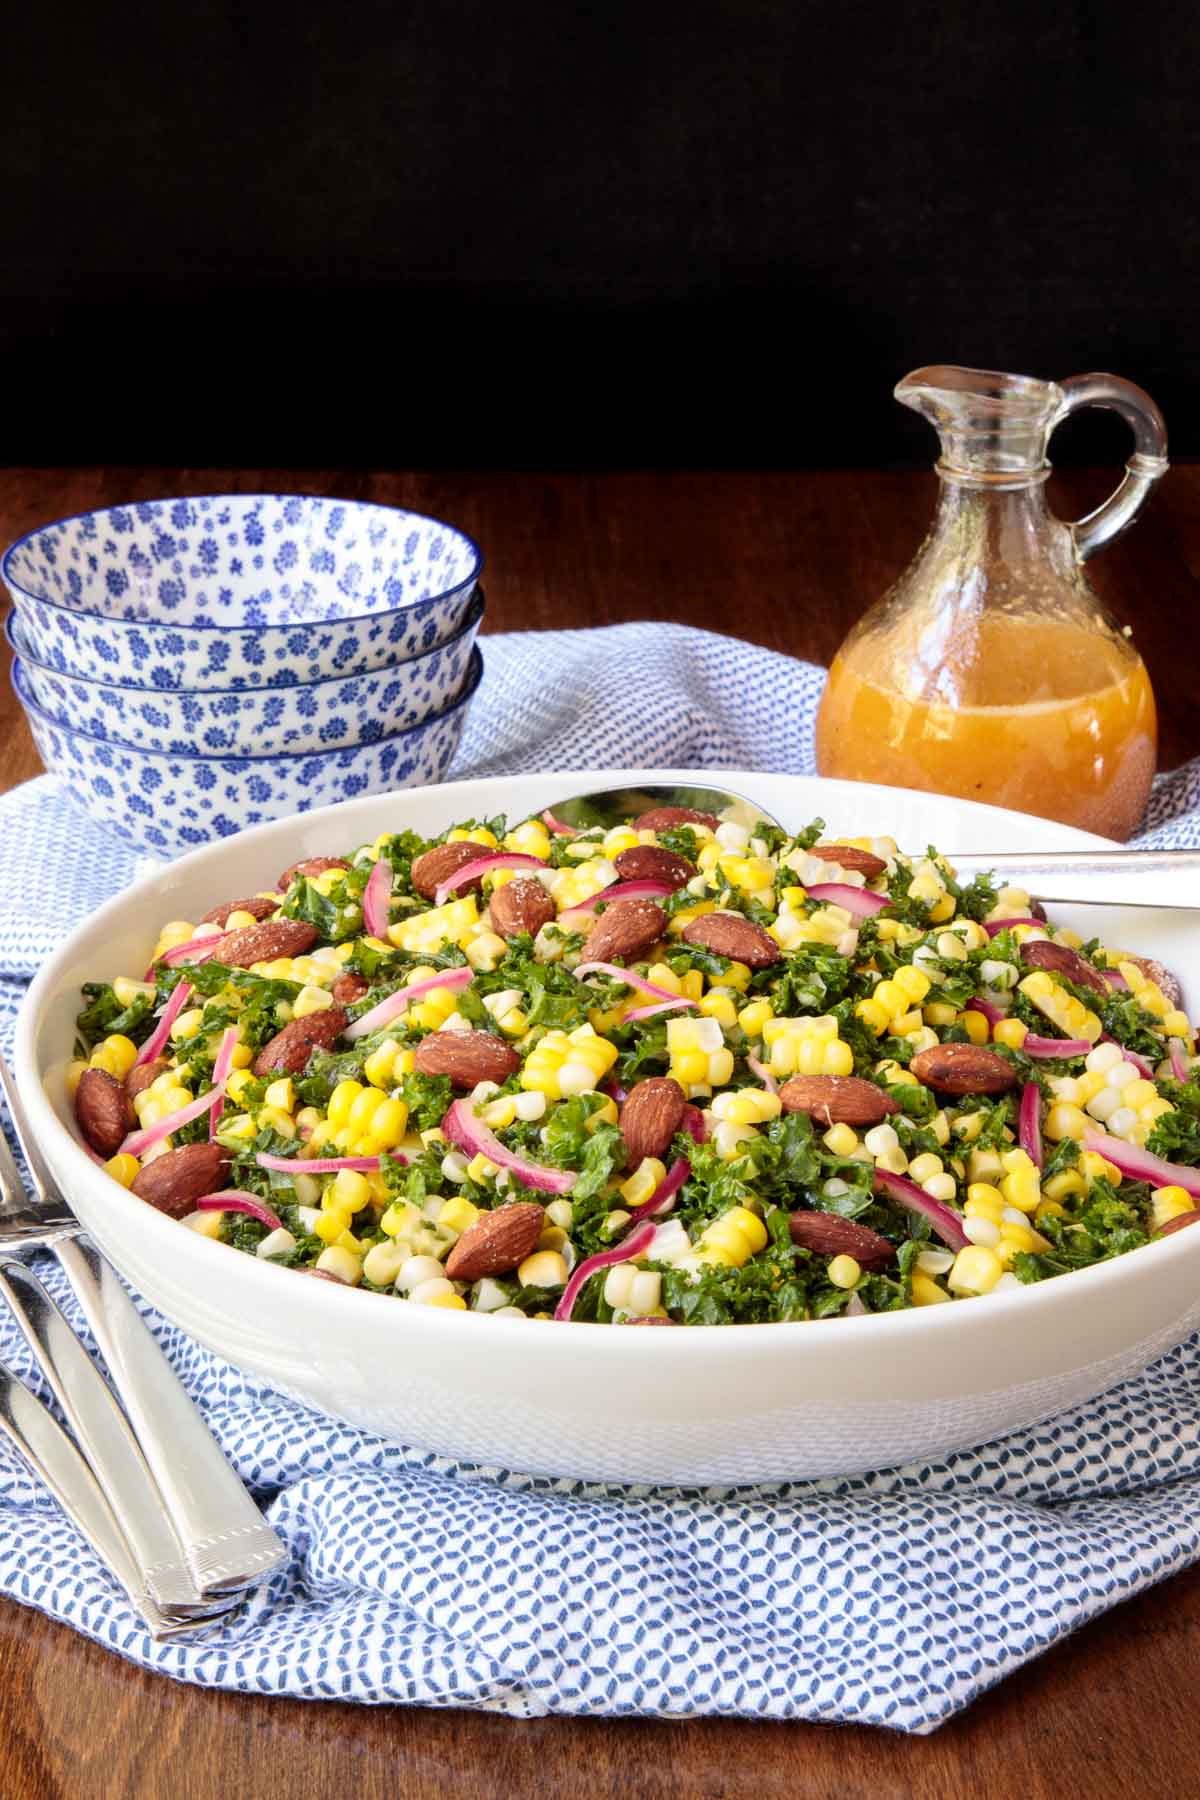 Photo of a Kale, Corn and Toasted Almonds Salad on a blue and white patterned napkin with dressing and serving bowls in the background.